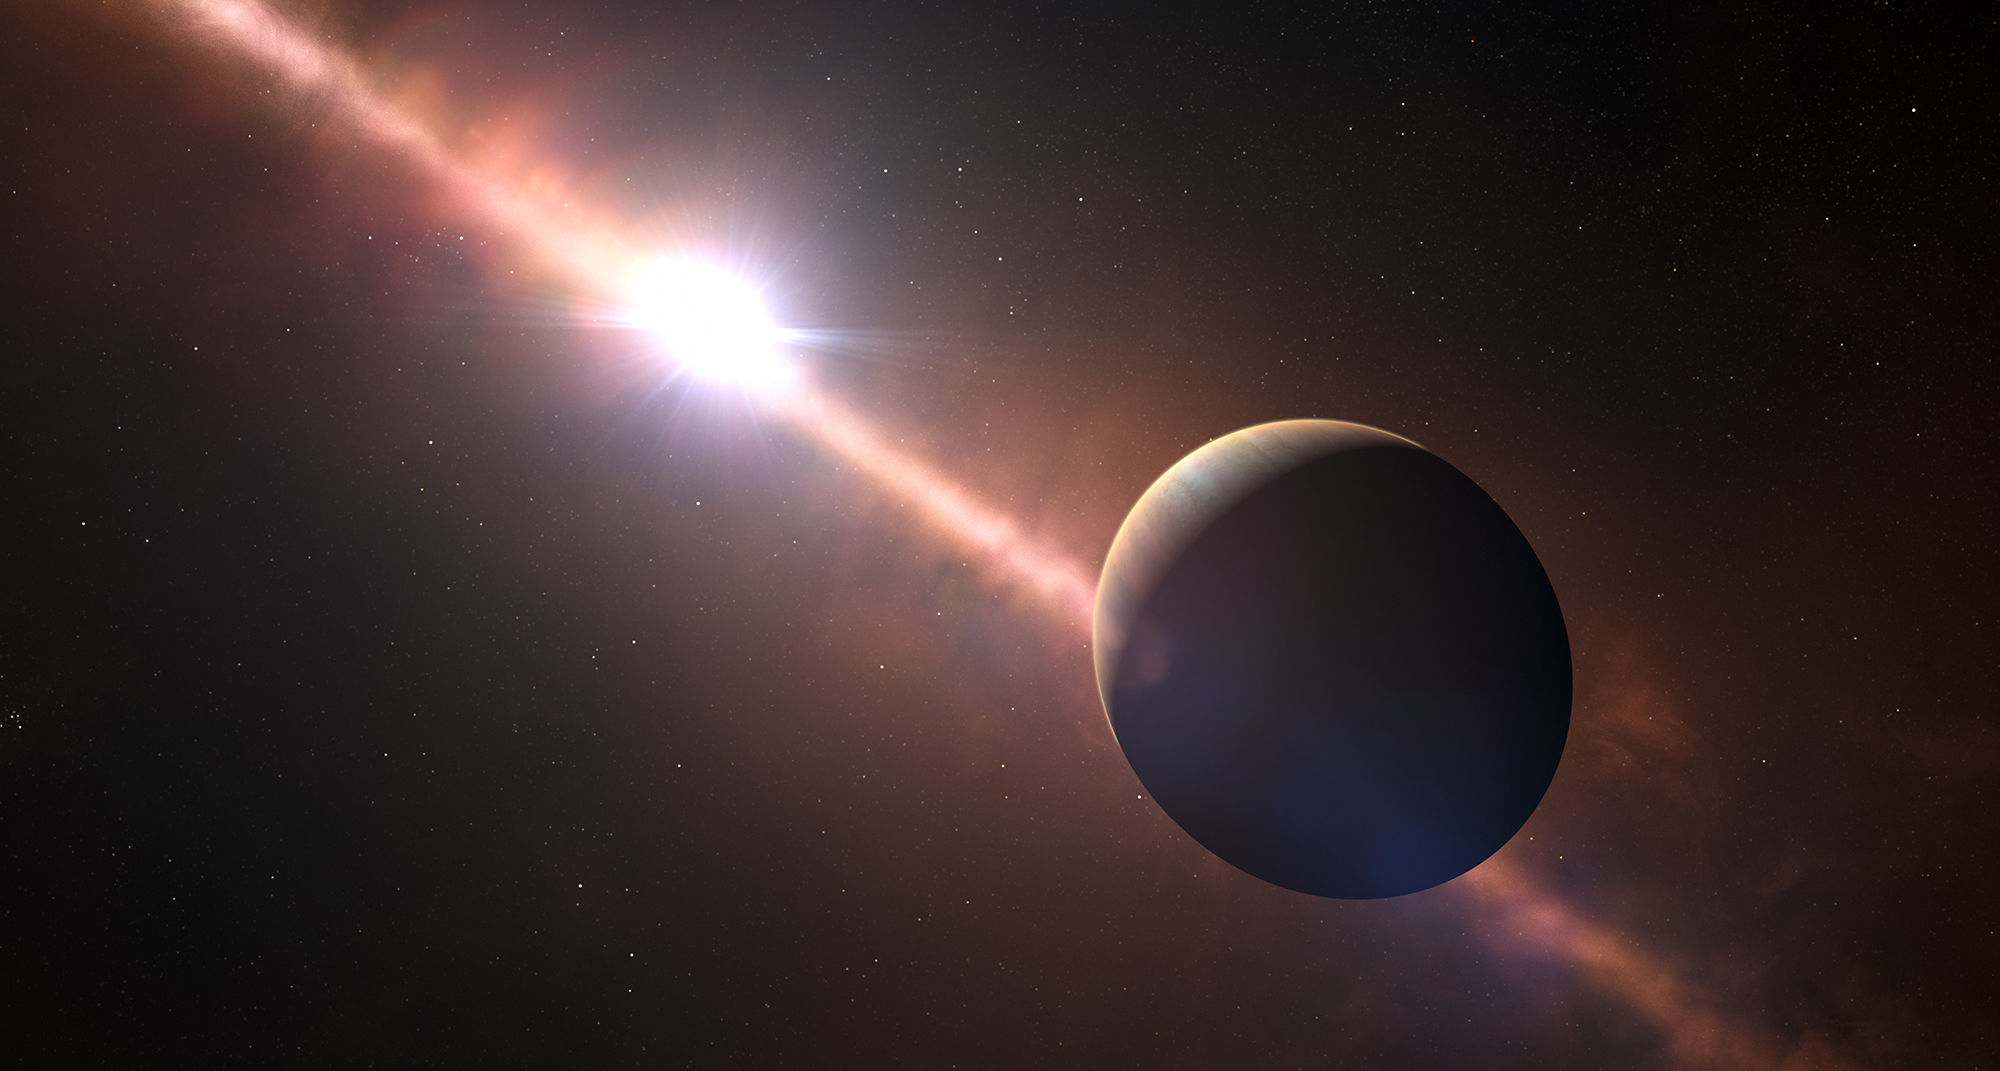 Astronomers 'find' a second planet orbiting Beta Pictoris due to extremely tiny wiggles by the first planet